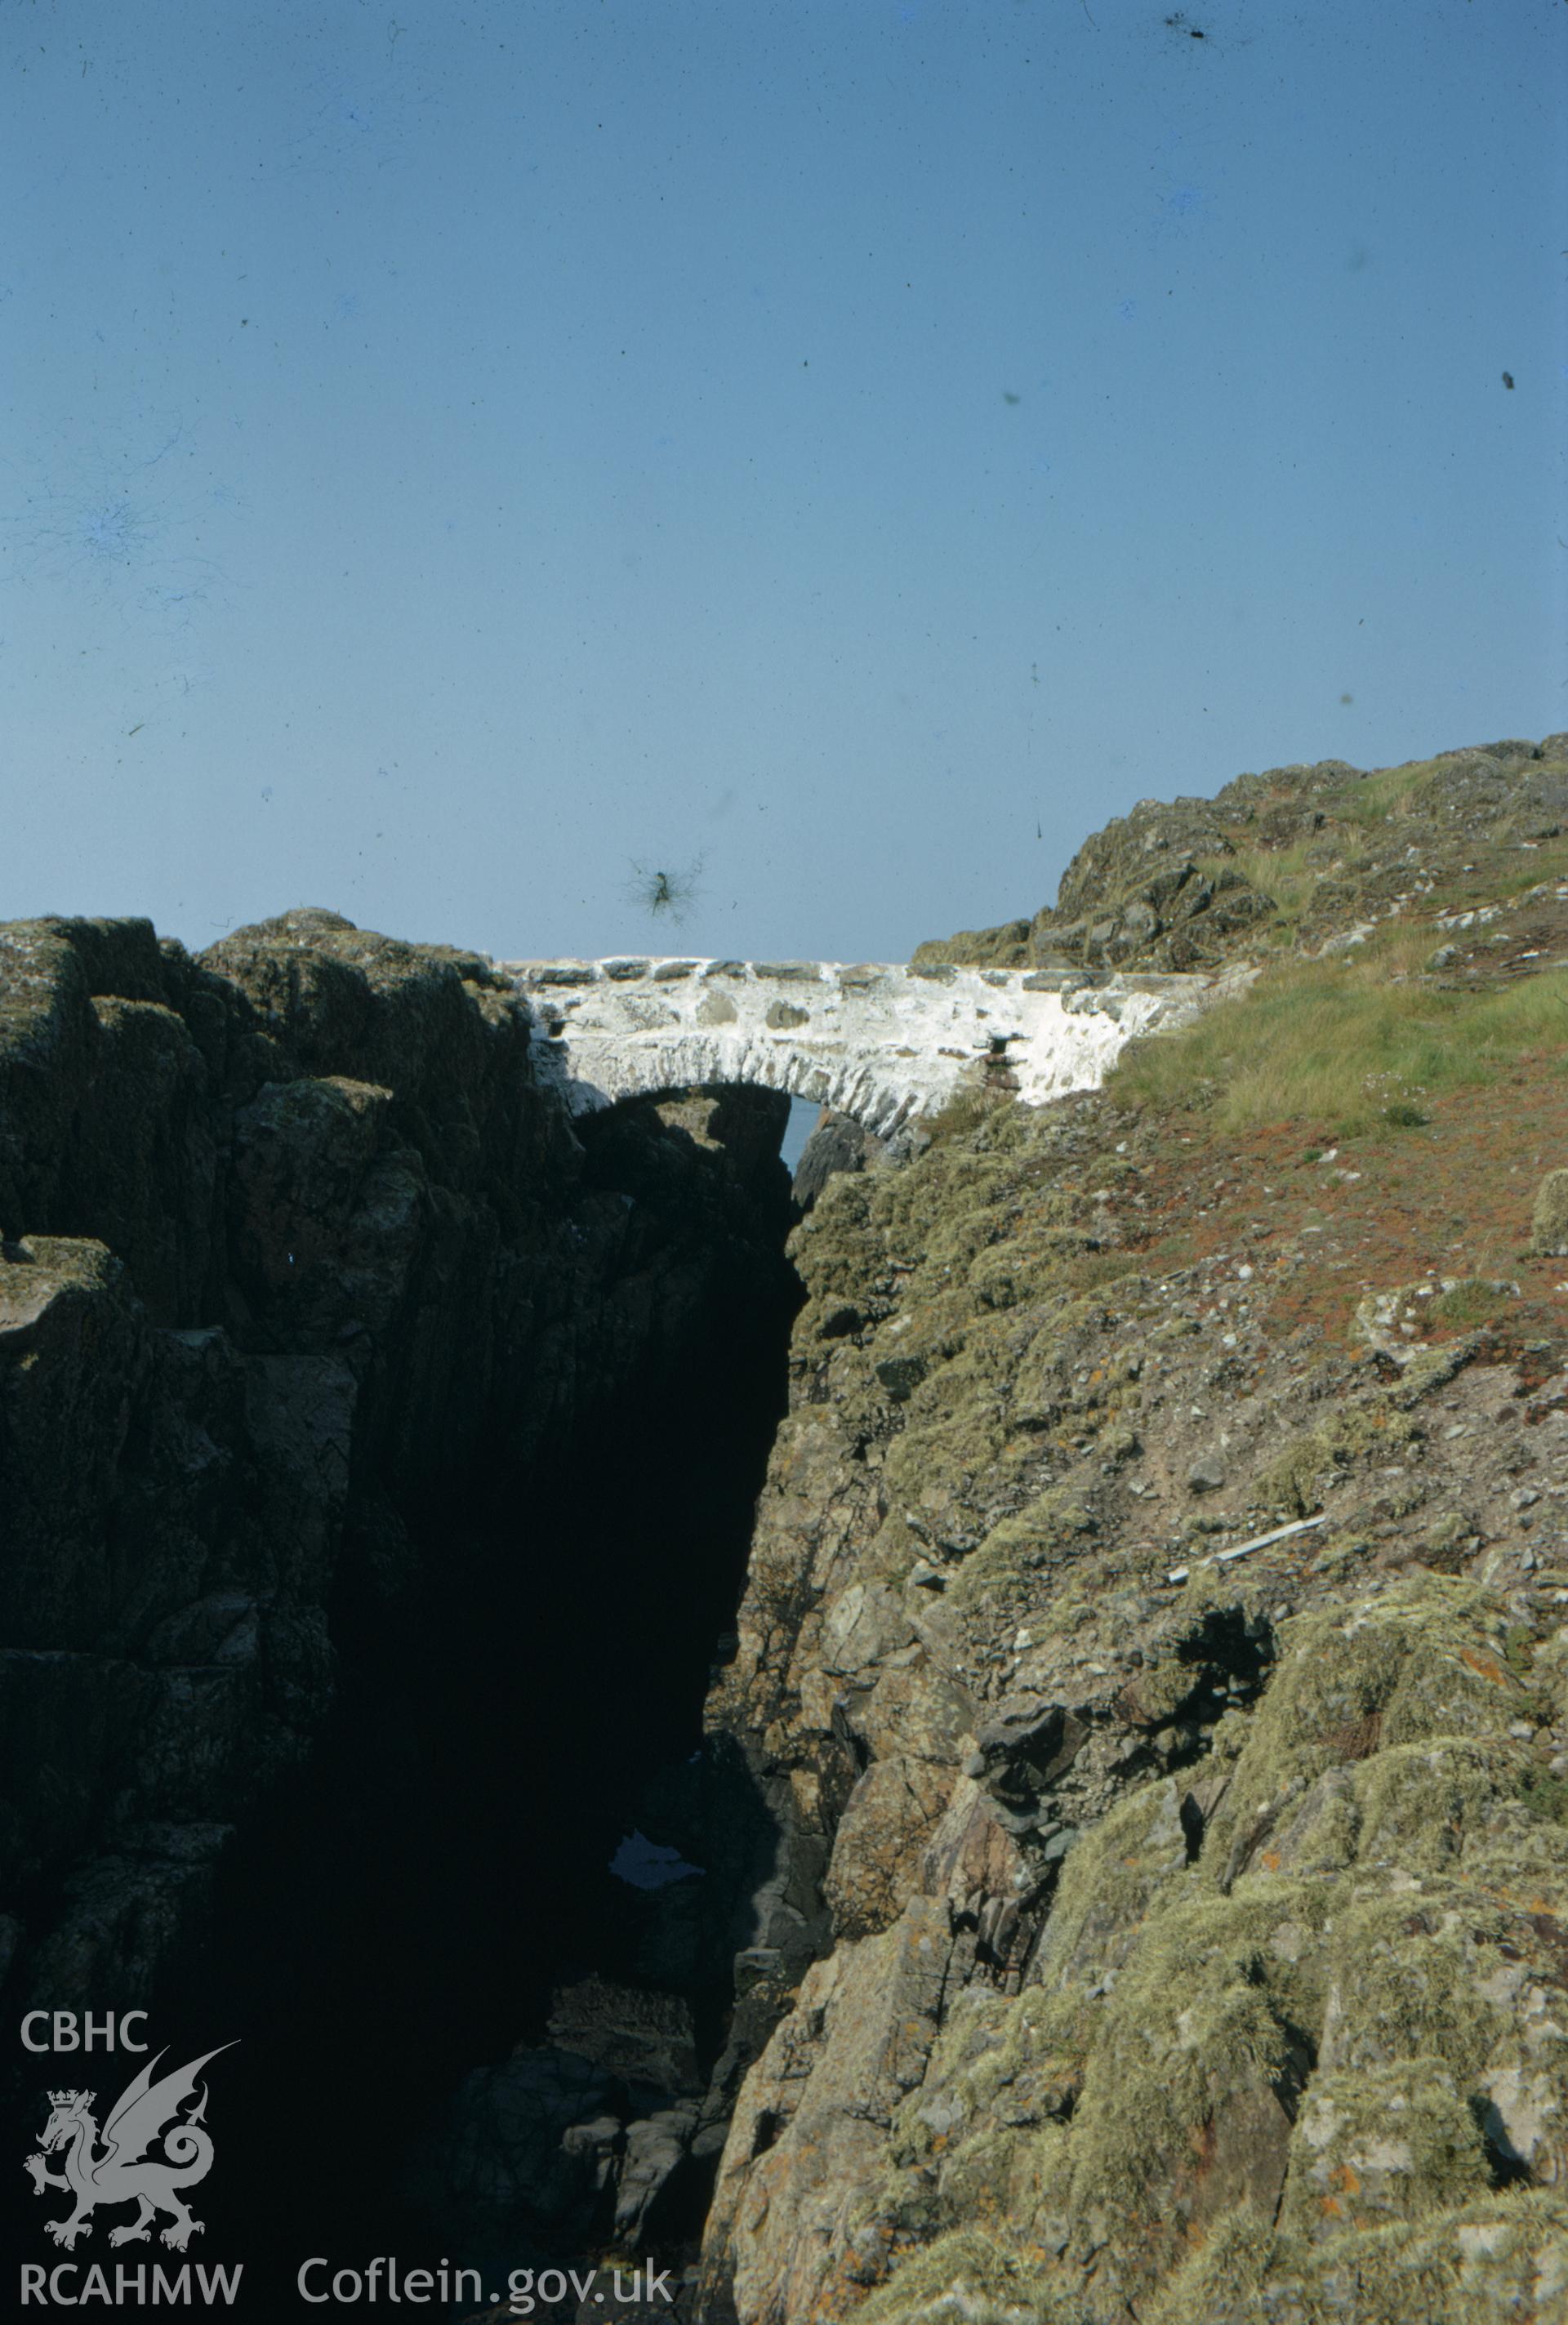 Colour slide showing the bridge over the chasm.